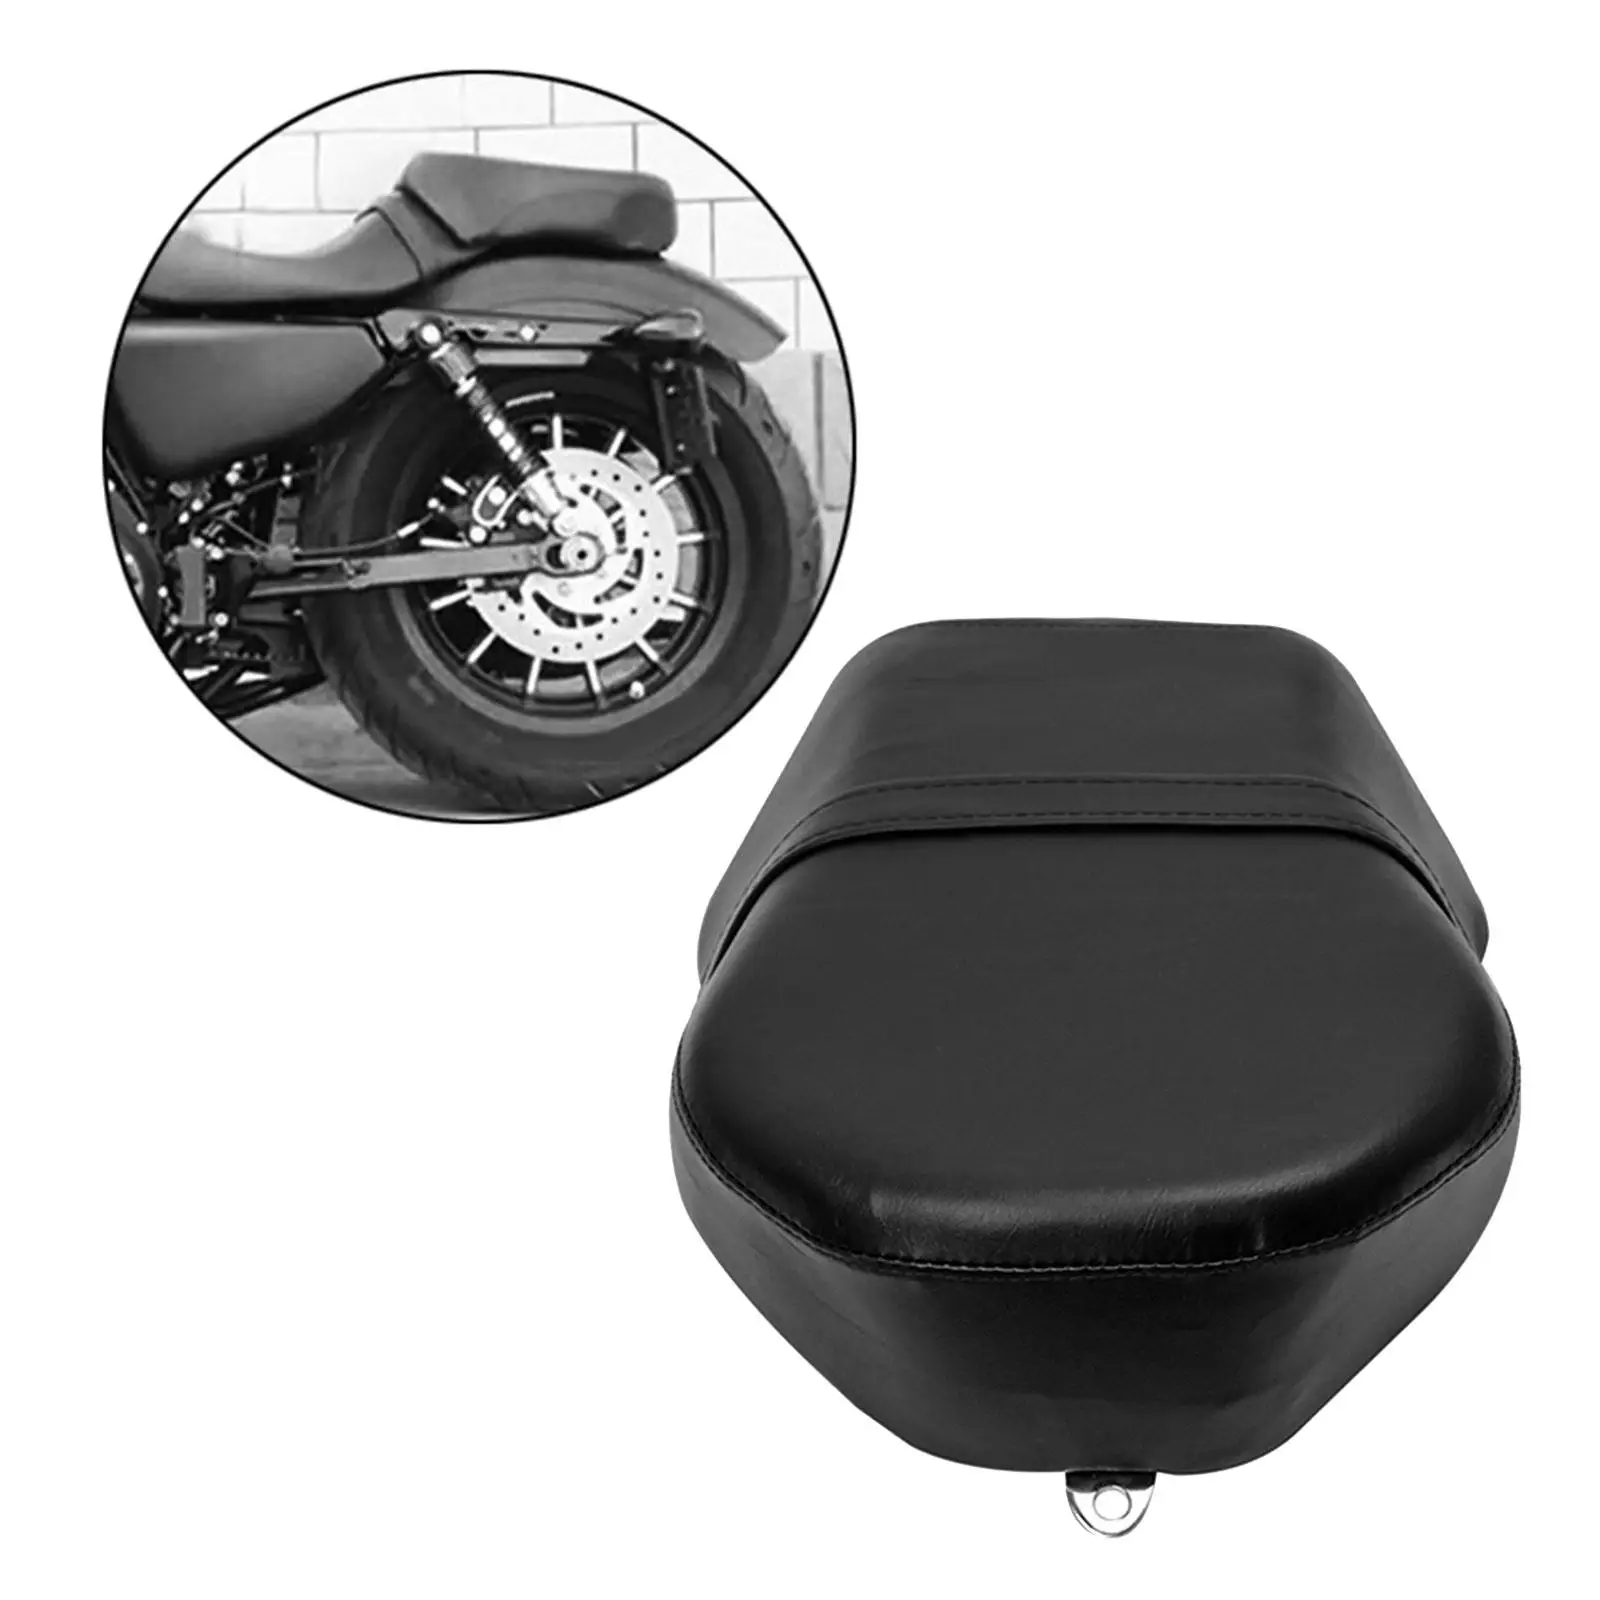 Motorcycle Passenger Seat Cushion for Harley Sportster Accessories